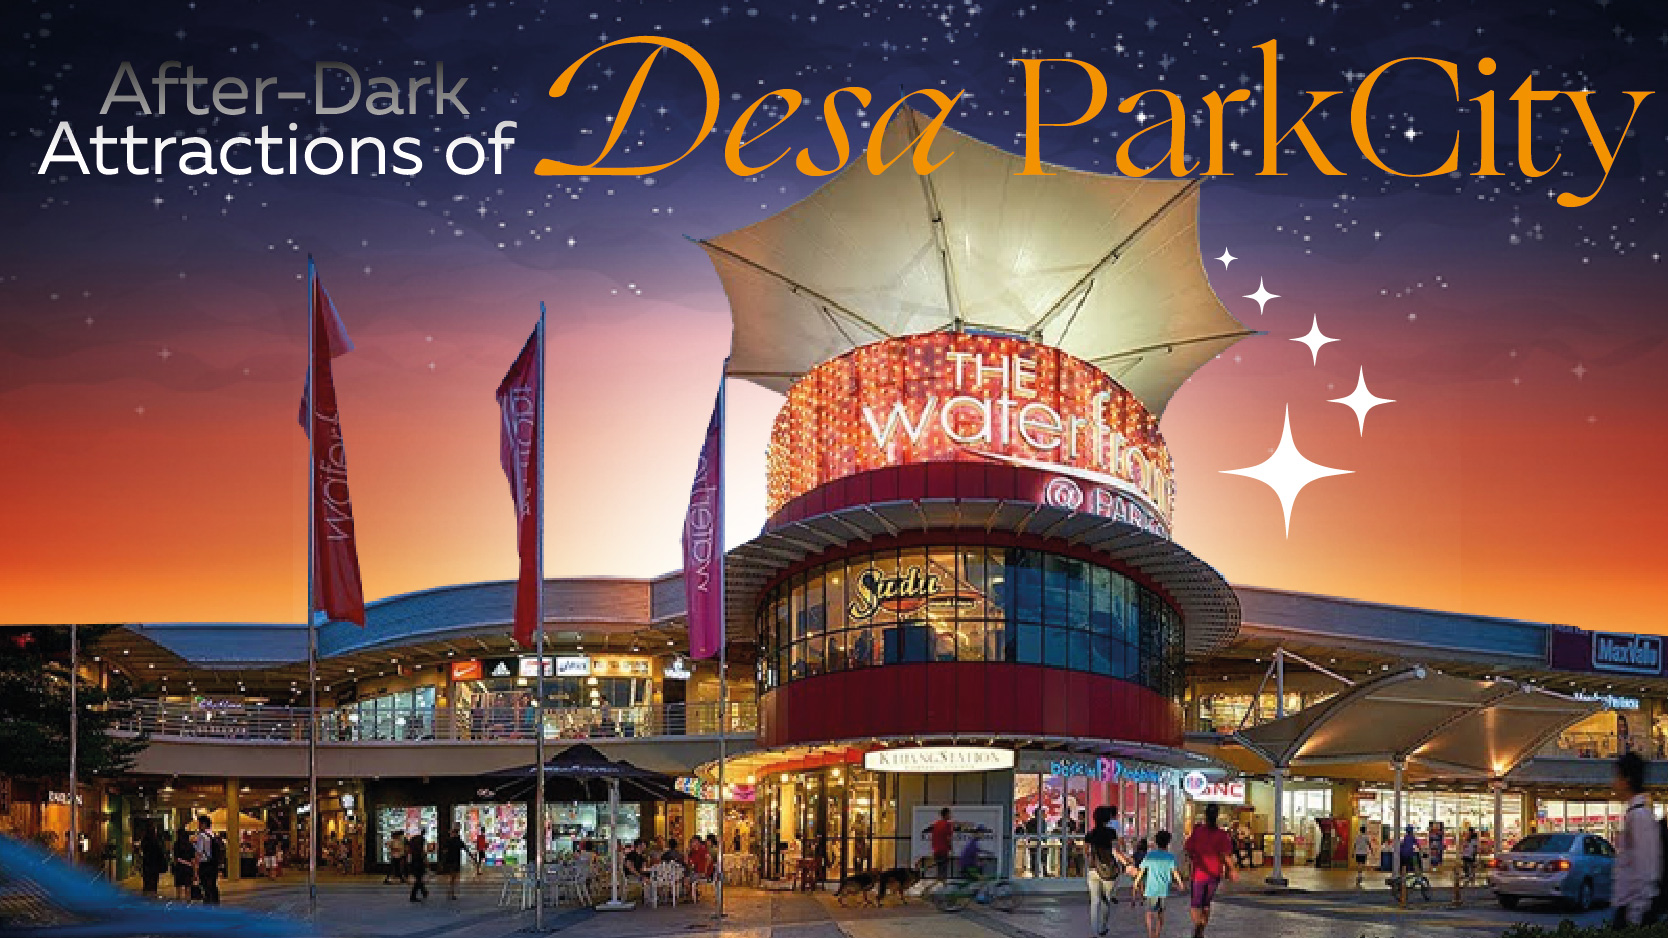 After-Dark Attractions of Desa ParkCity 